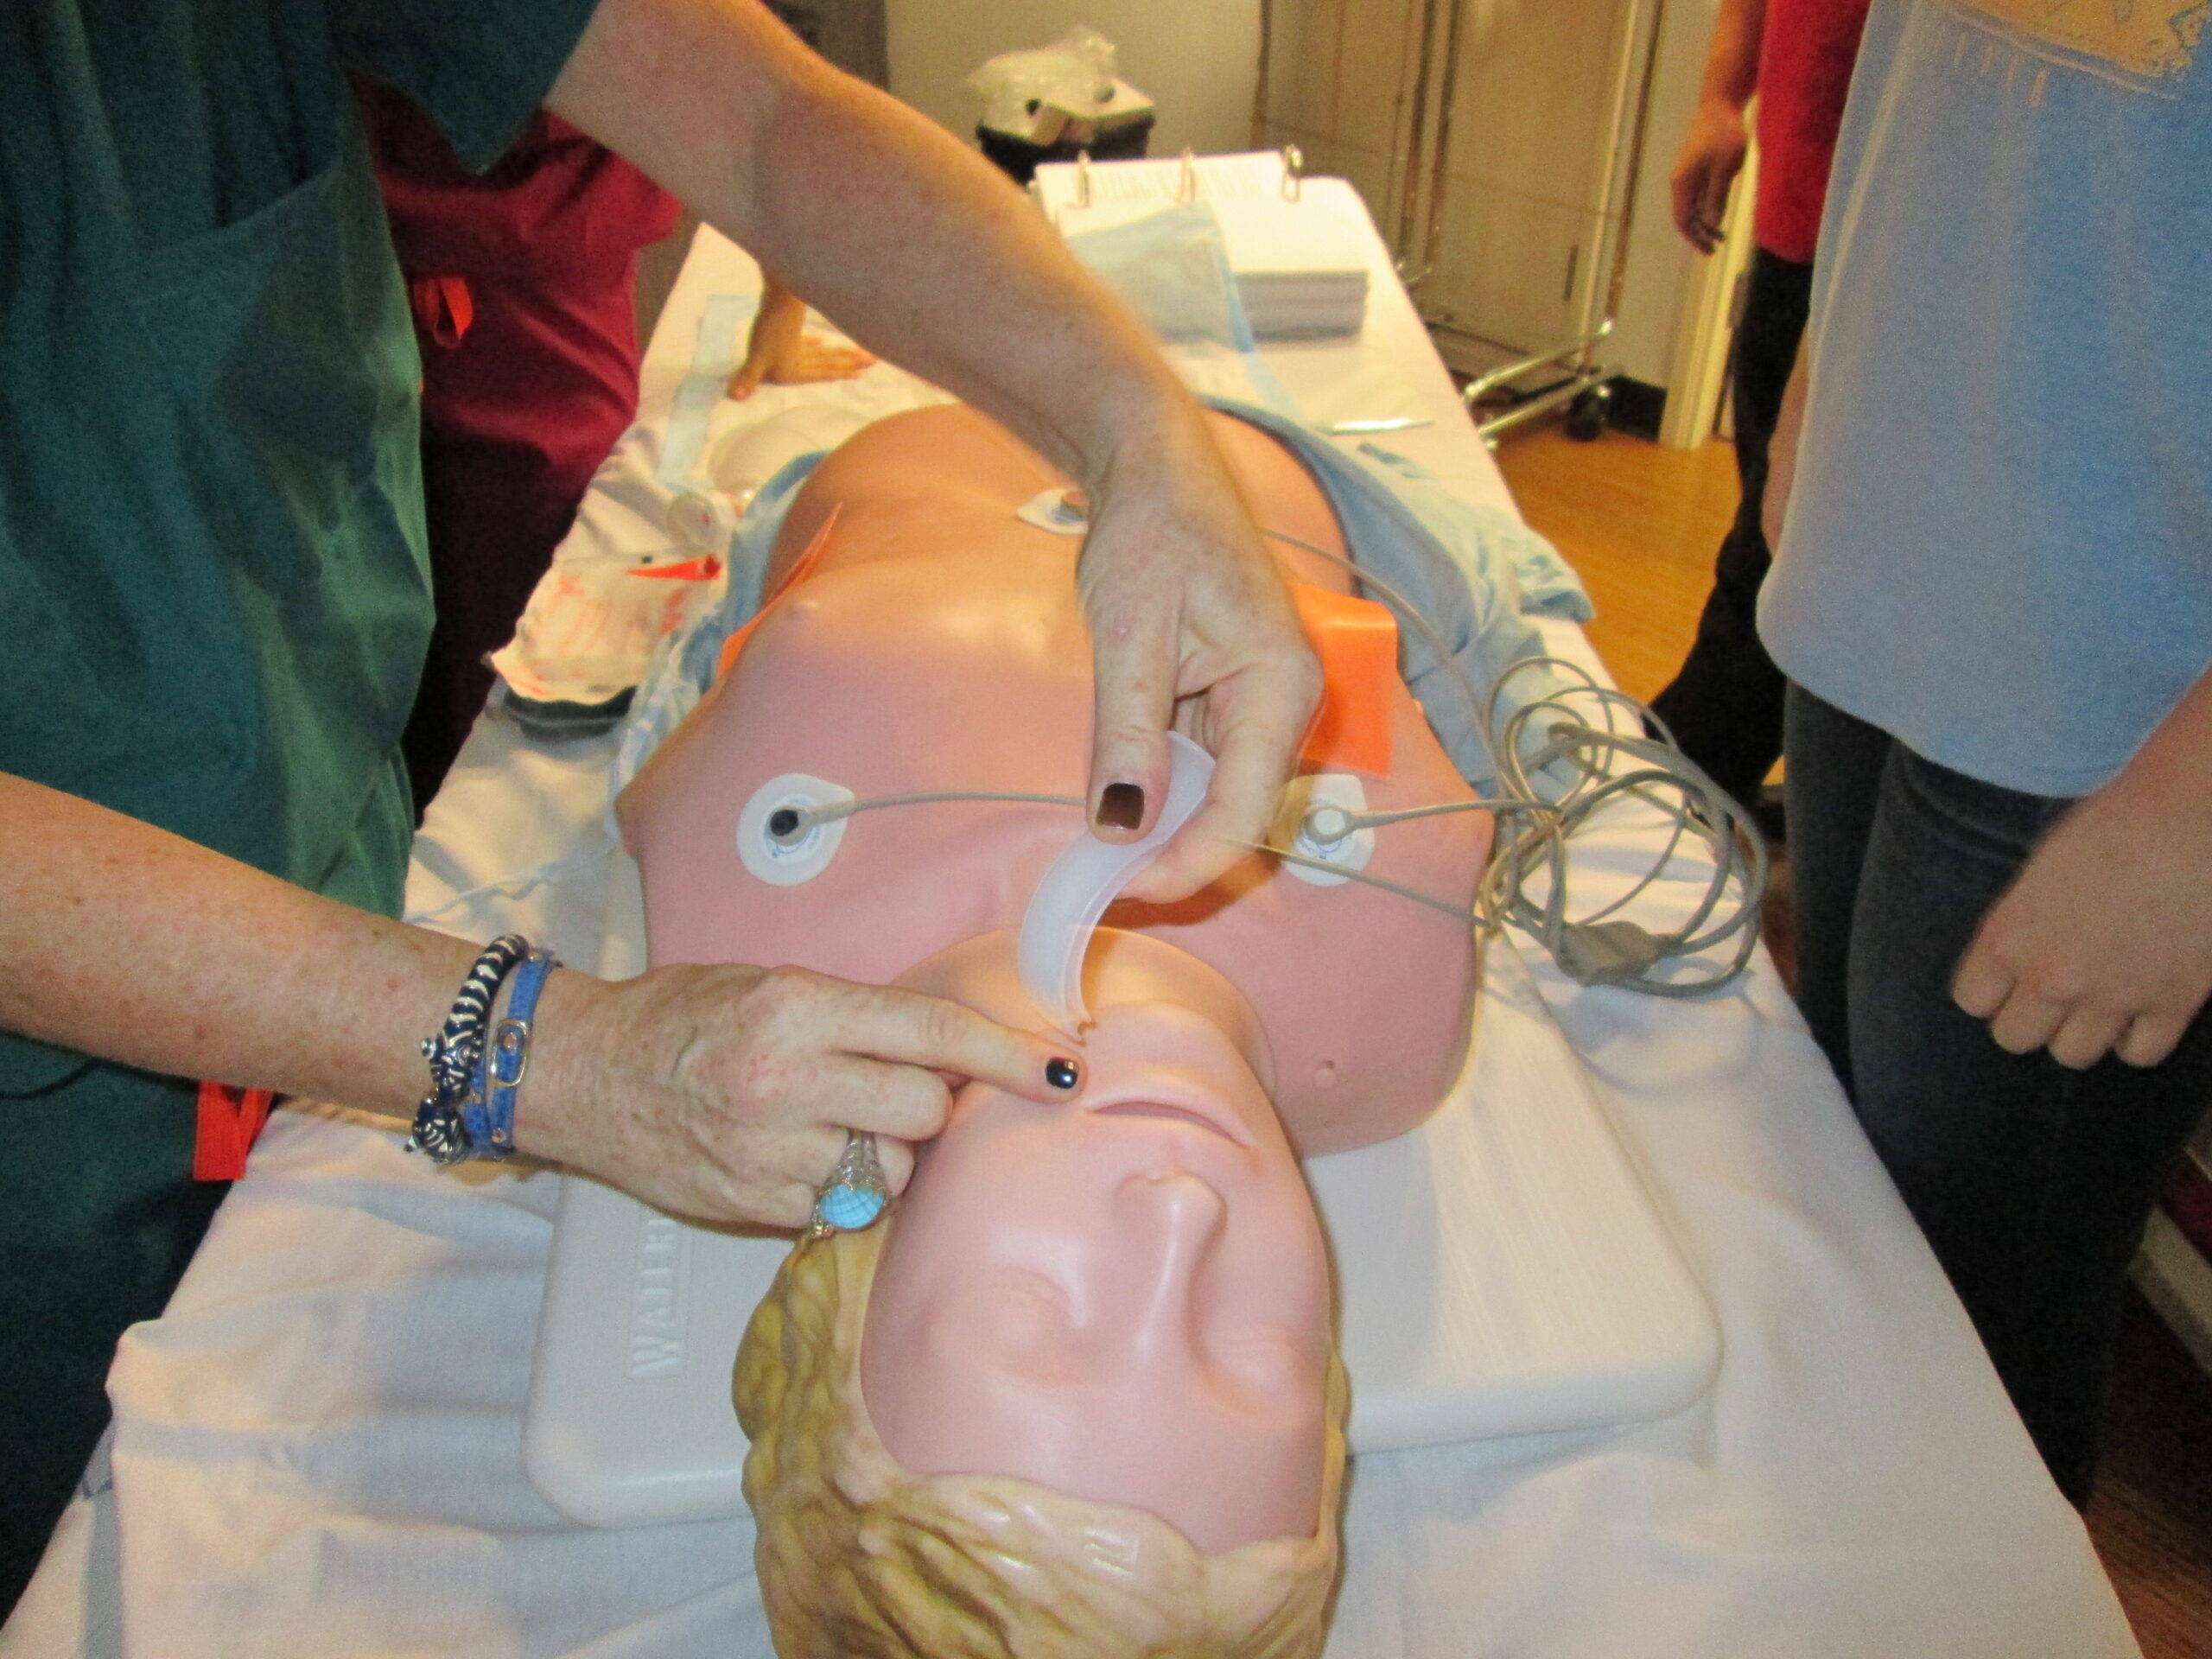 CPR Drill for the surgery center accreditation inspection